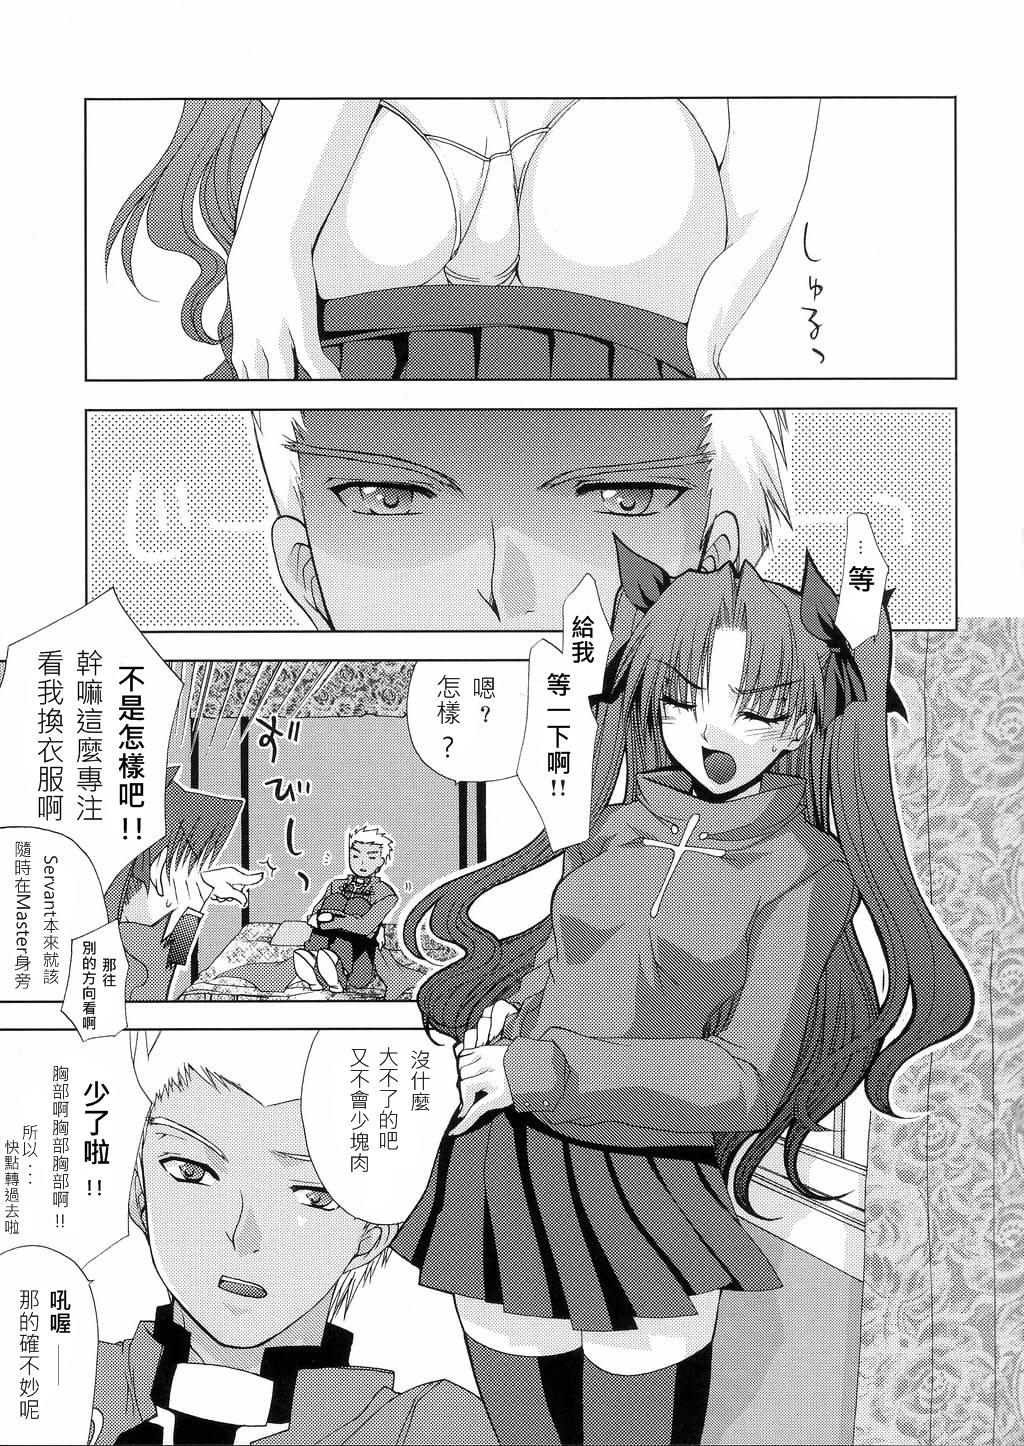 Web permeate - Fate stay night Caliente - Page 5